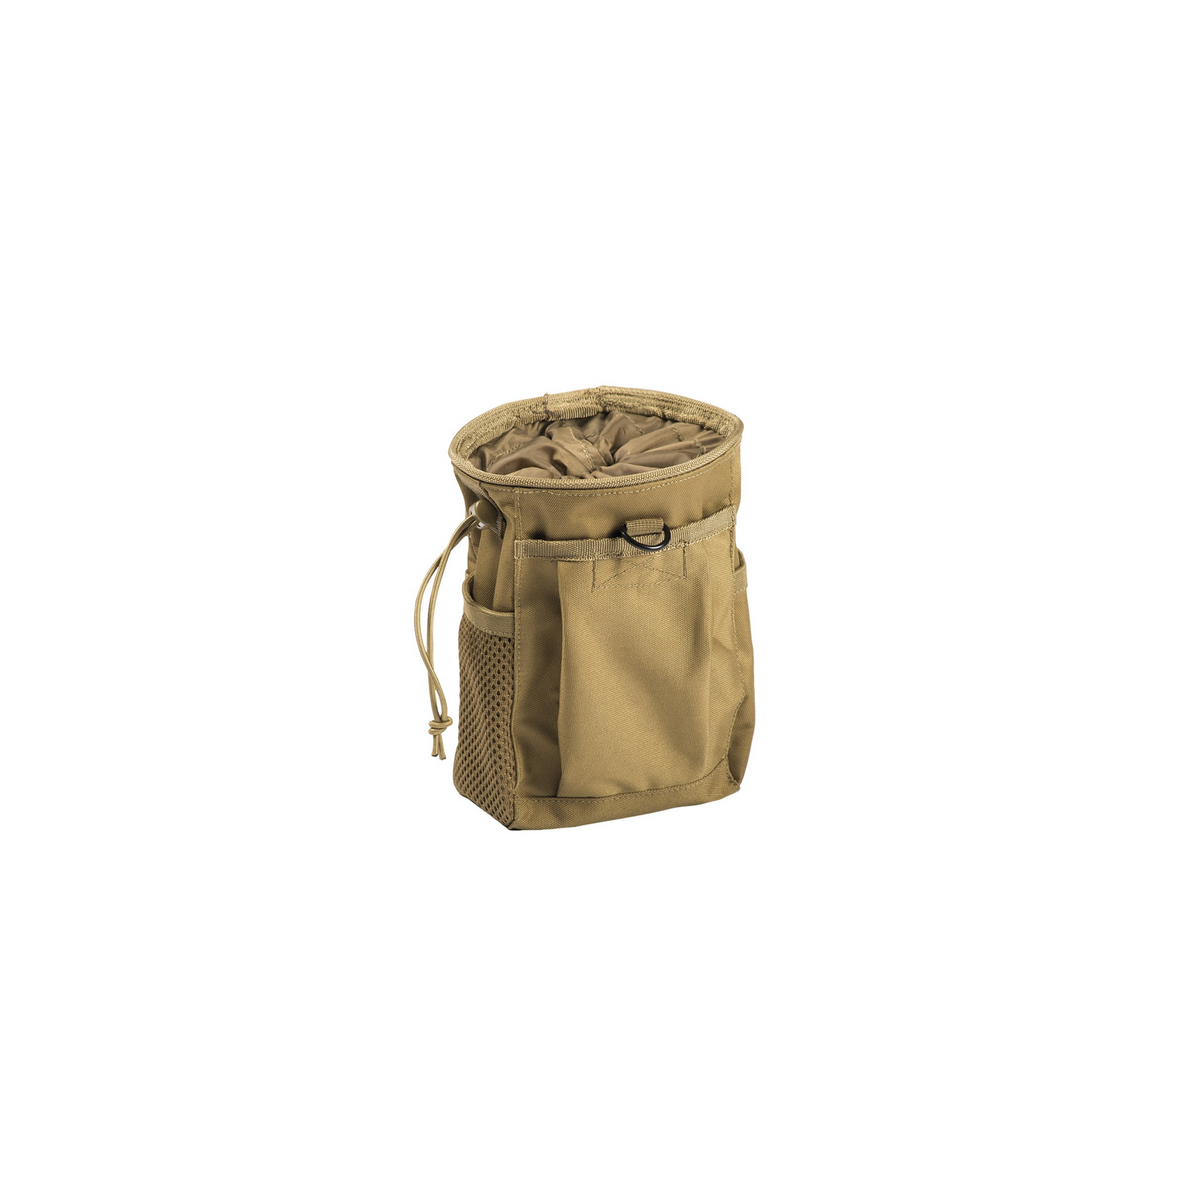 EMPTY SHELL POUCH MOLLE Coyote